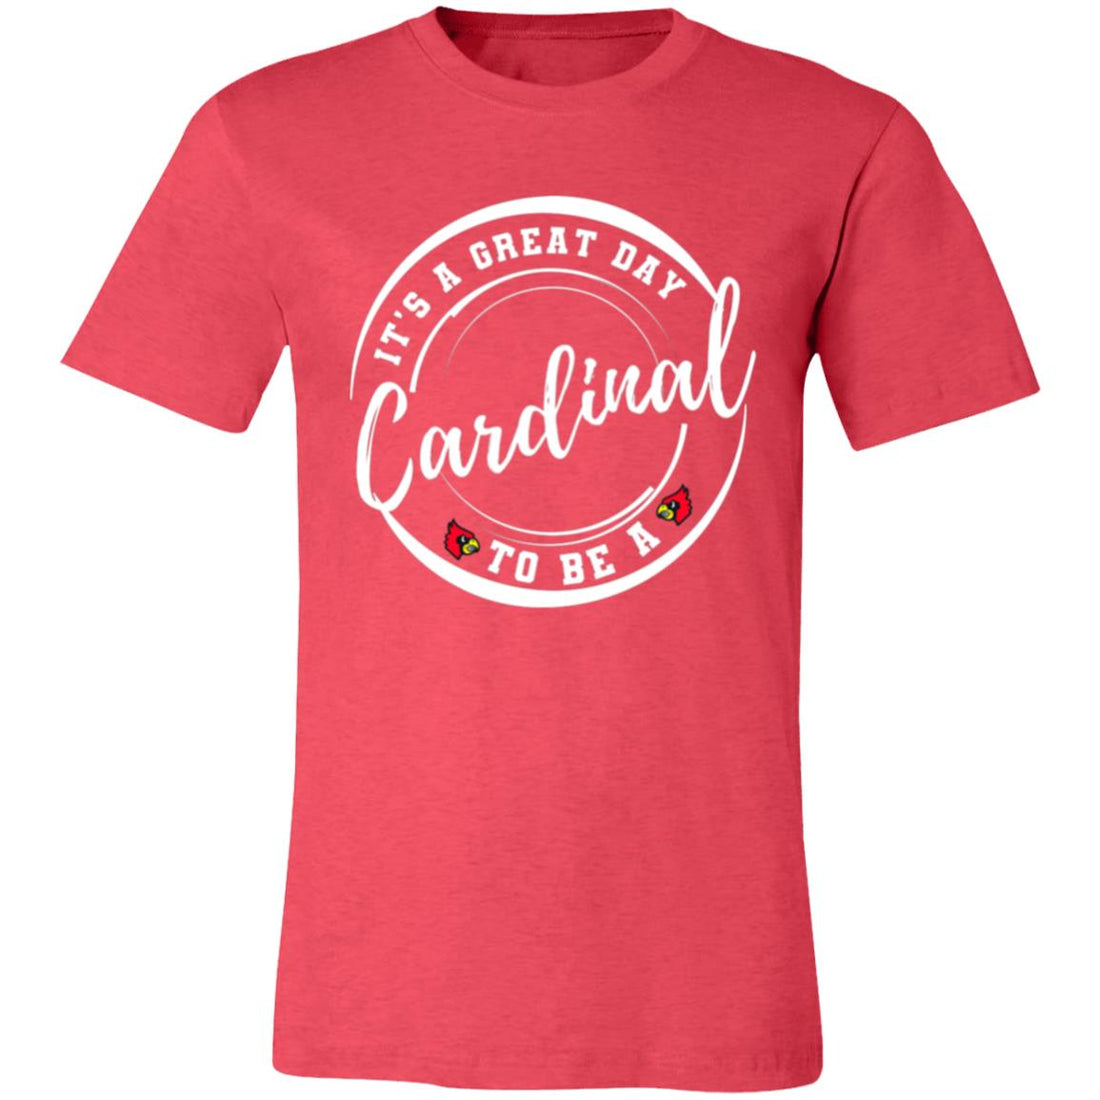 Great Day to be a Cardinal T-Shirt - T-Shirts - Positively Sassy - Great Day to be a Cardinal T-Shirt